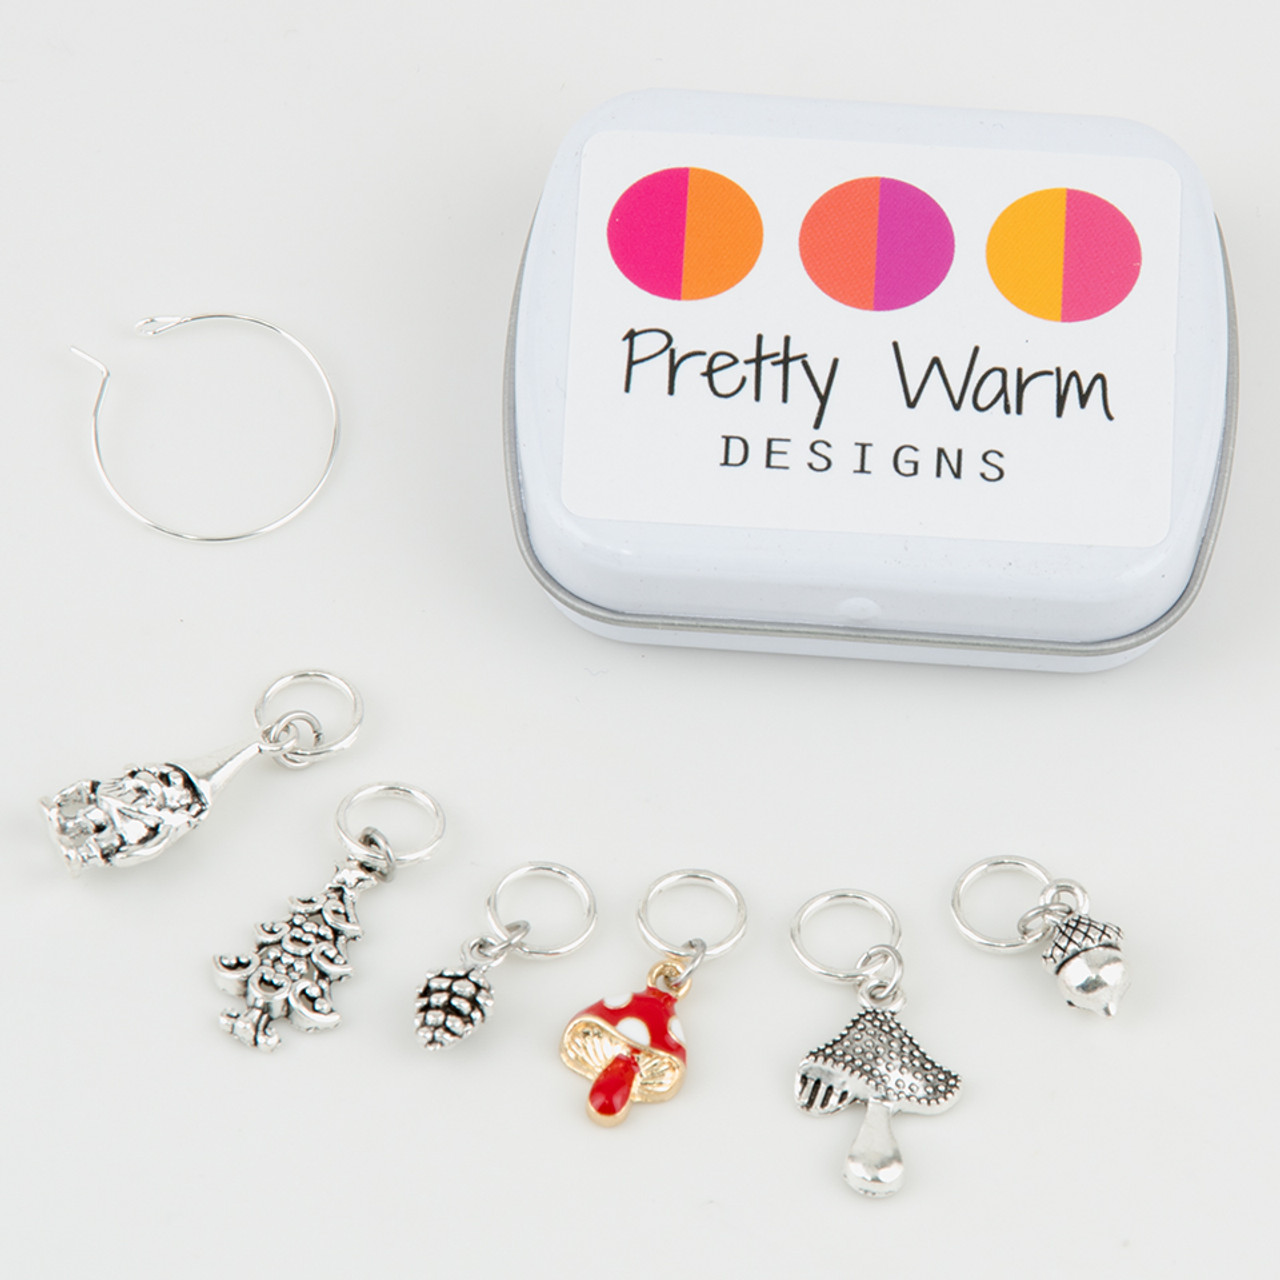 Pretty Warm Designs Stitch Markers at The Loopy Ewe